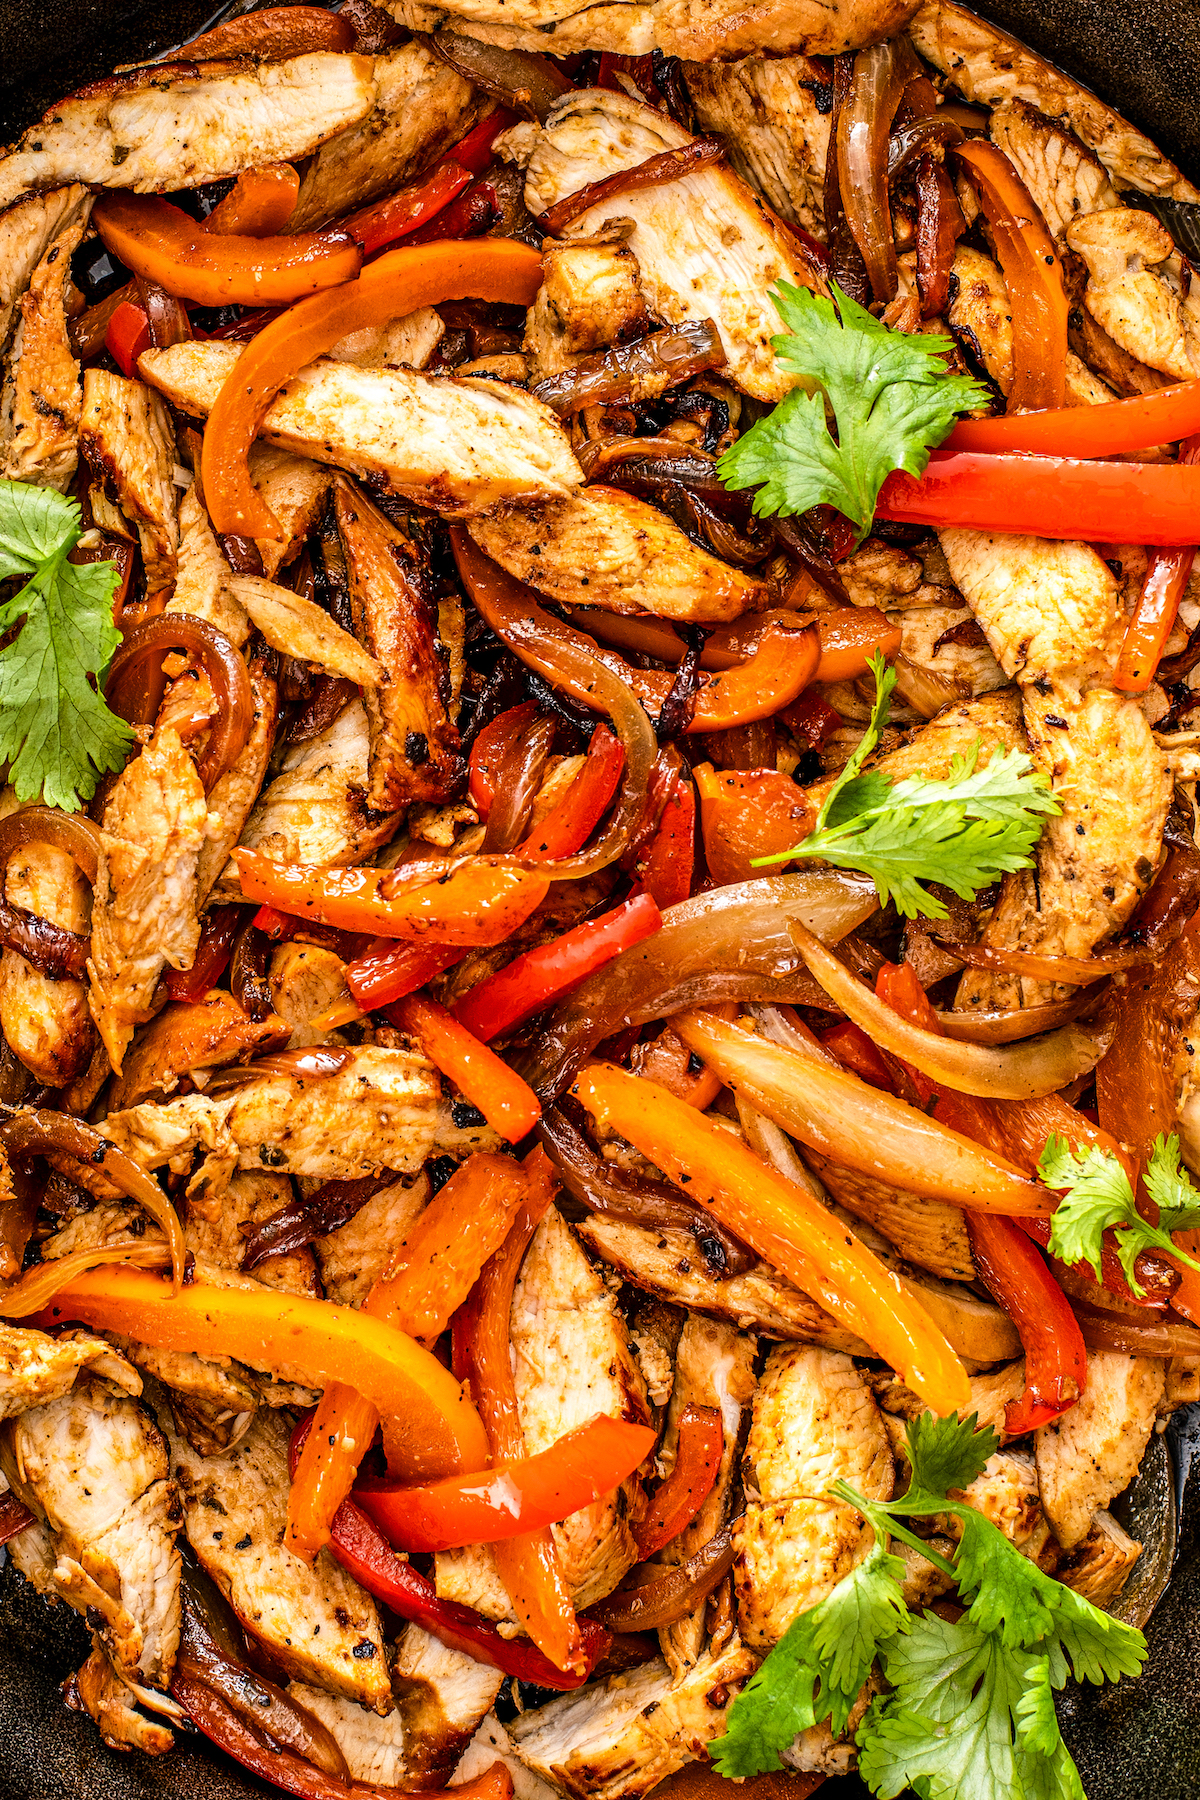 Overhead shot of a skillet of fajitas made with chicken and vegetables.